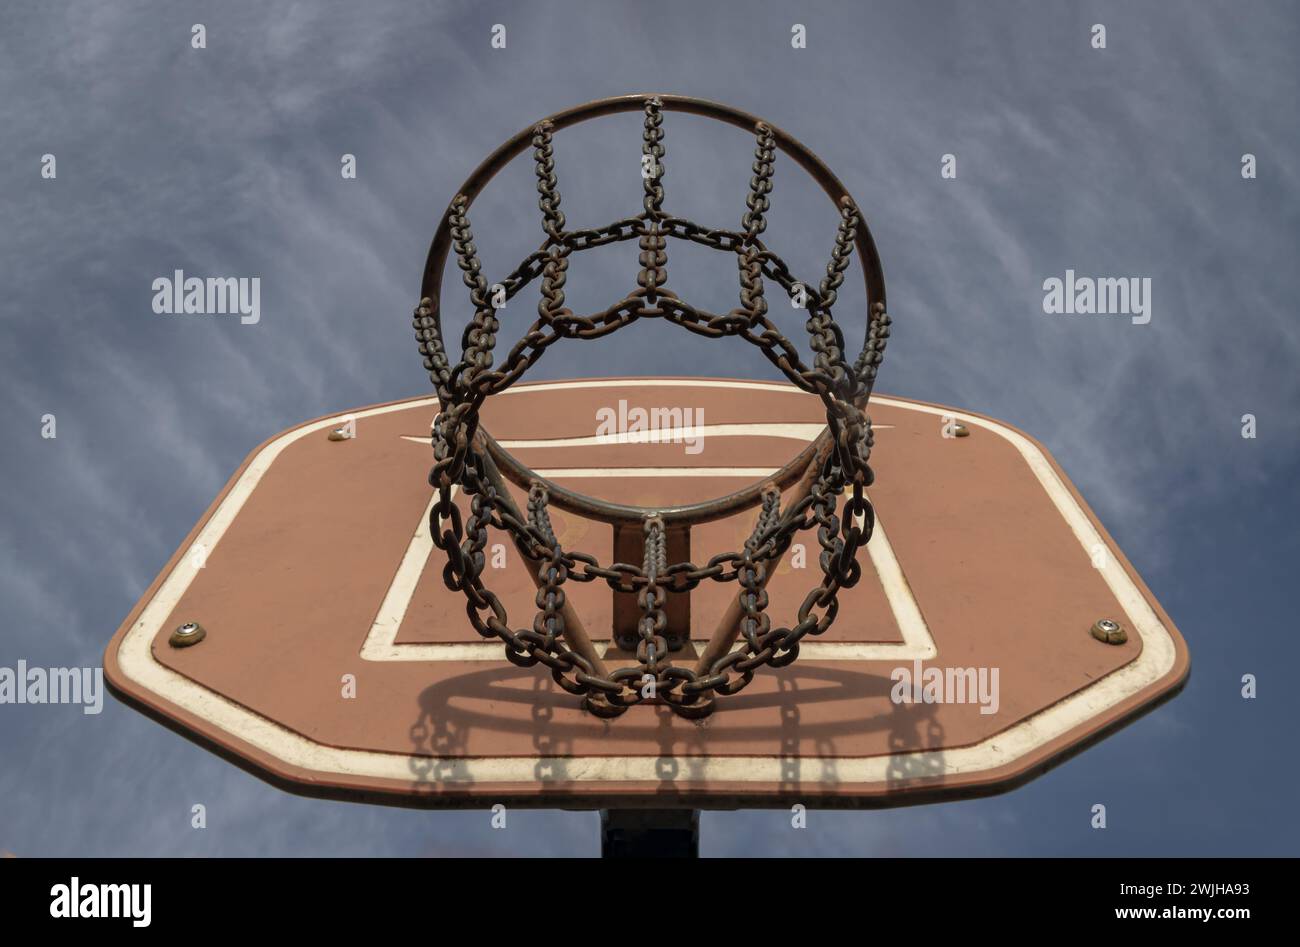 Edinburgh, Scotland, Jan 19, 2024 - View of Basketball backboard with the hoop metal ring and steel chain net against blue sky background seen from be Stock Photo